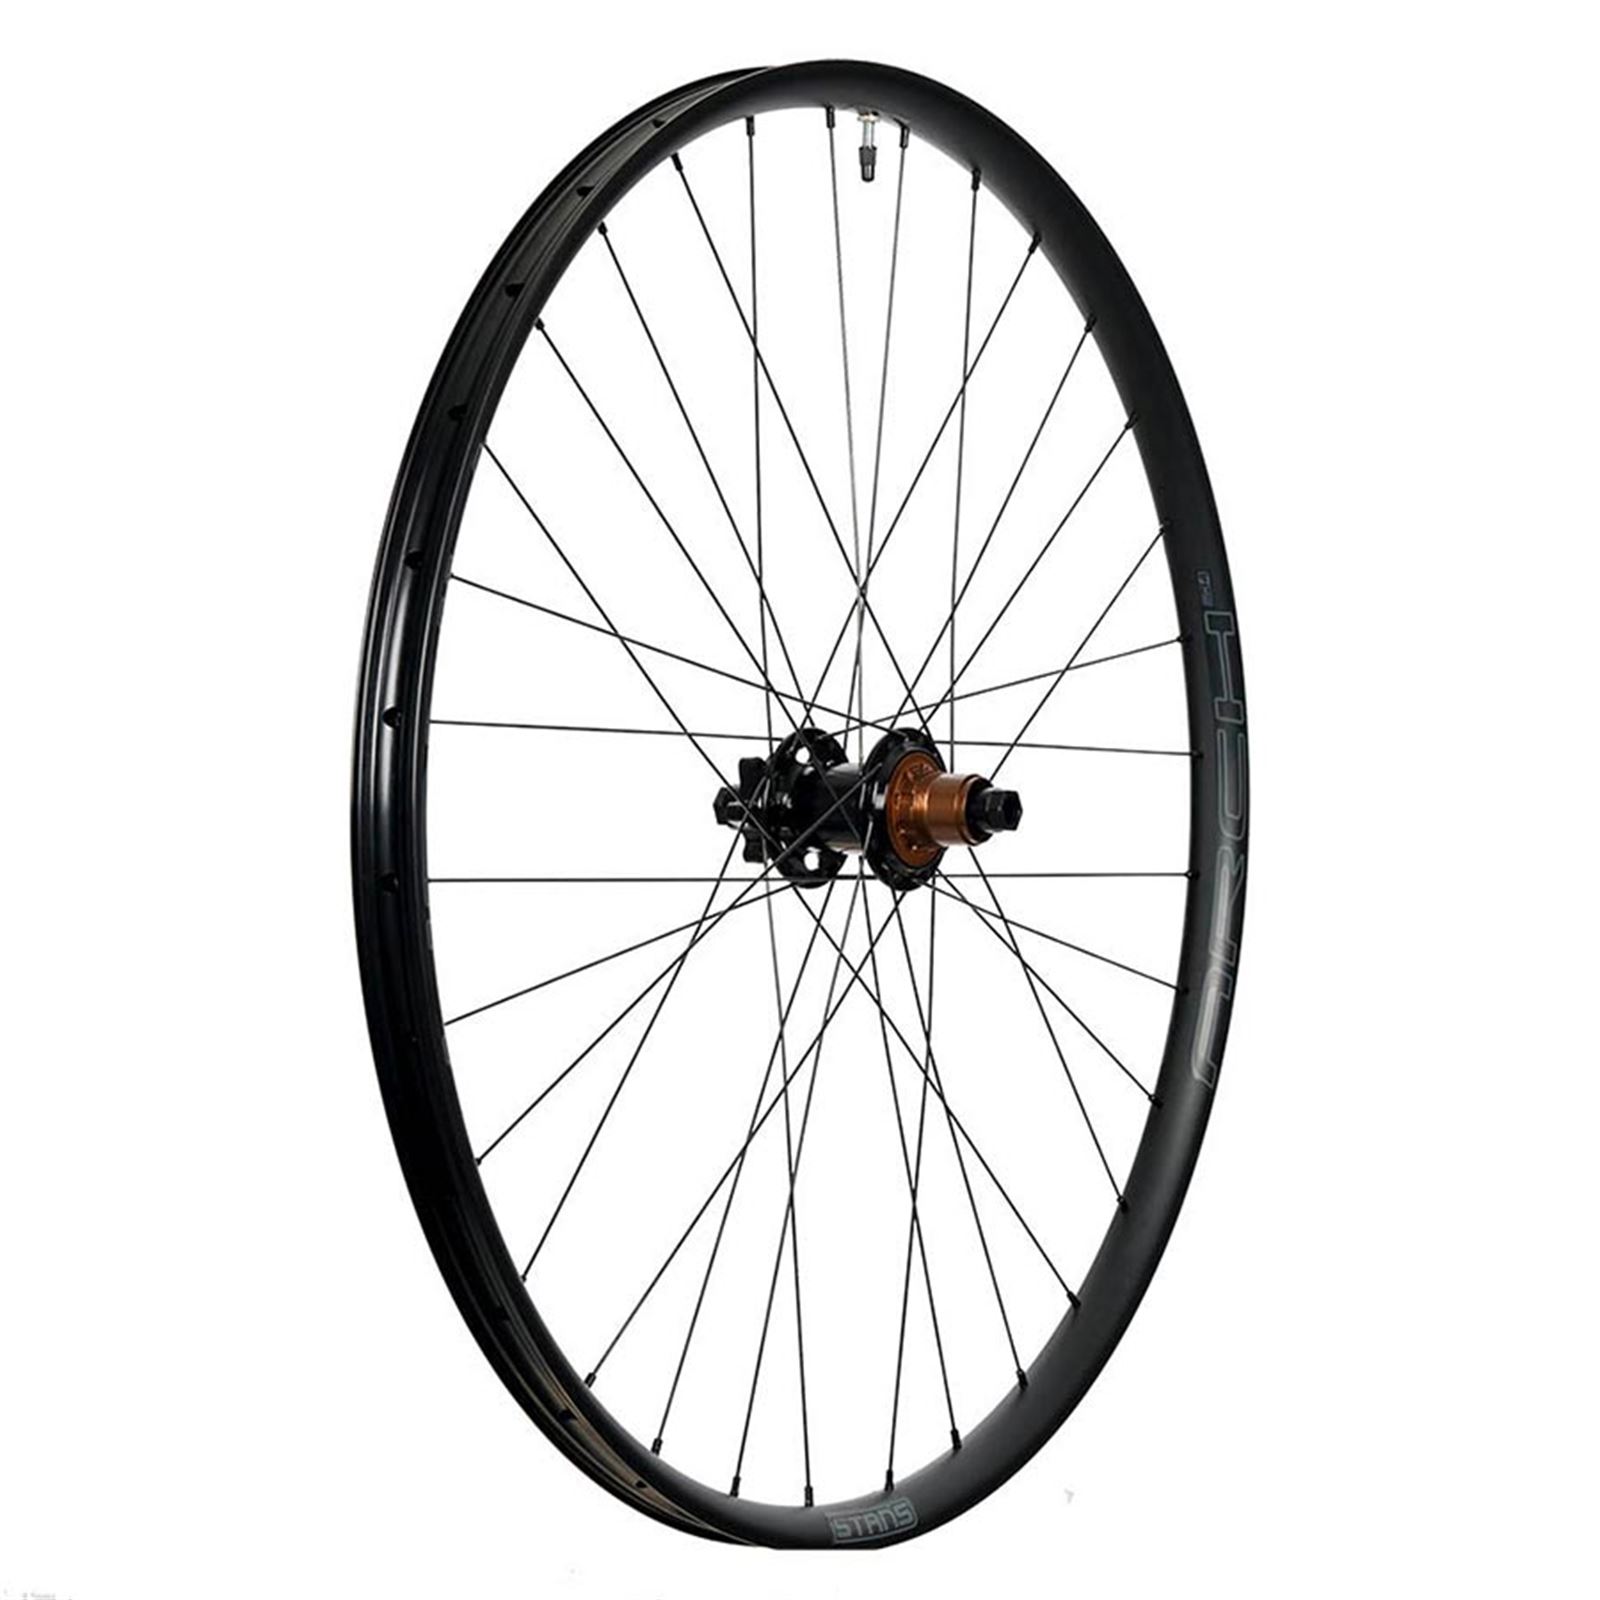 Stans No Tubes Arch MK4 Bike Wheel - Rear 29''/622 - Motorcycle, ATV / UTV & Parts | The Best Powersports, Motorcycle, ATV & Snow Gear, Accessories and